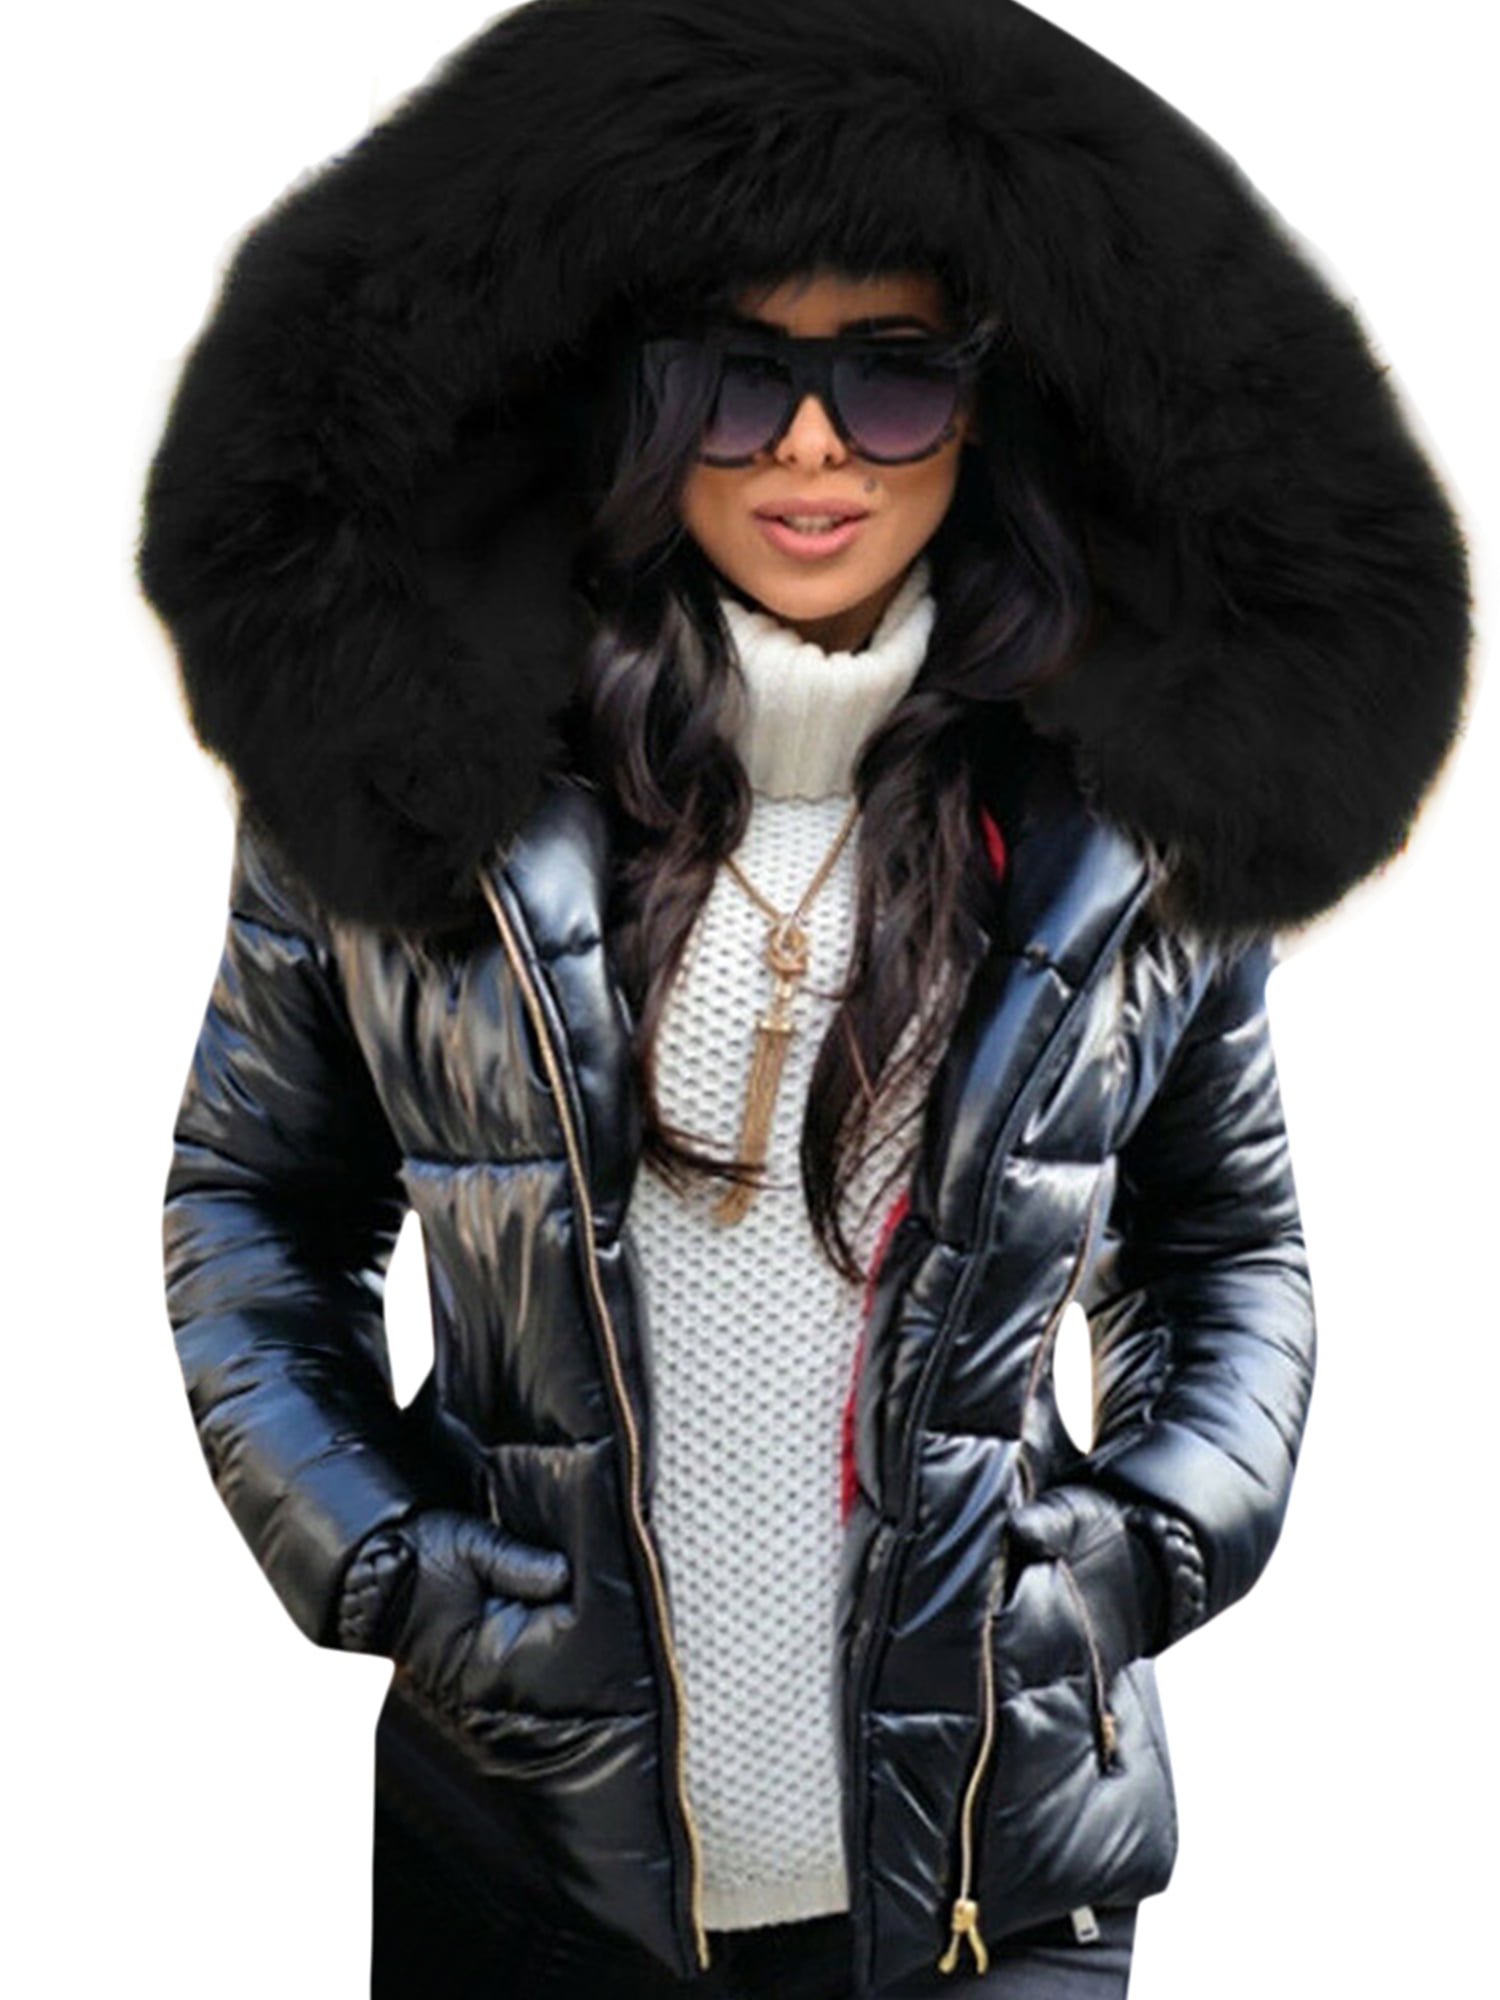 wuliLINL Quilted Coat for Women Cotton-Padded Jacket Solid Color Puffer Jackets Coats Long Jacket Outwear Parka 